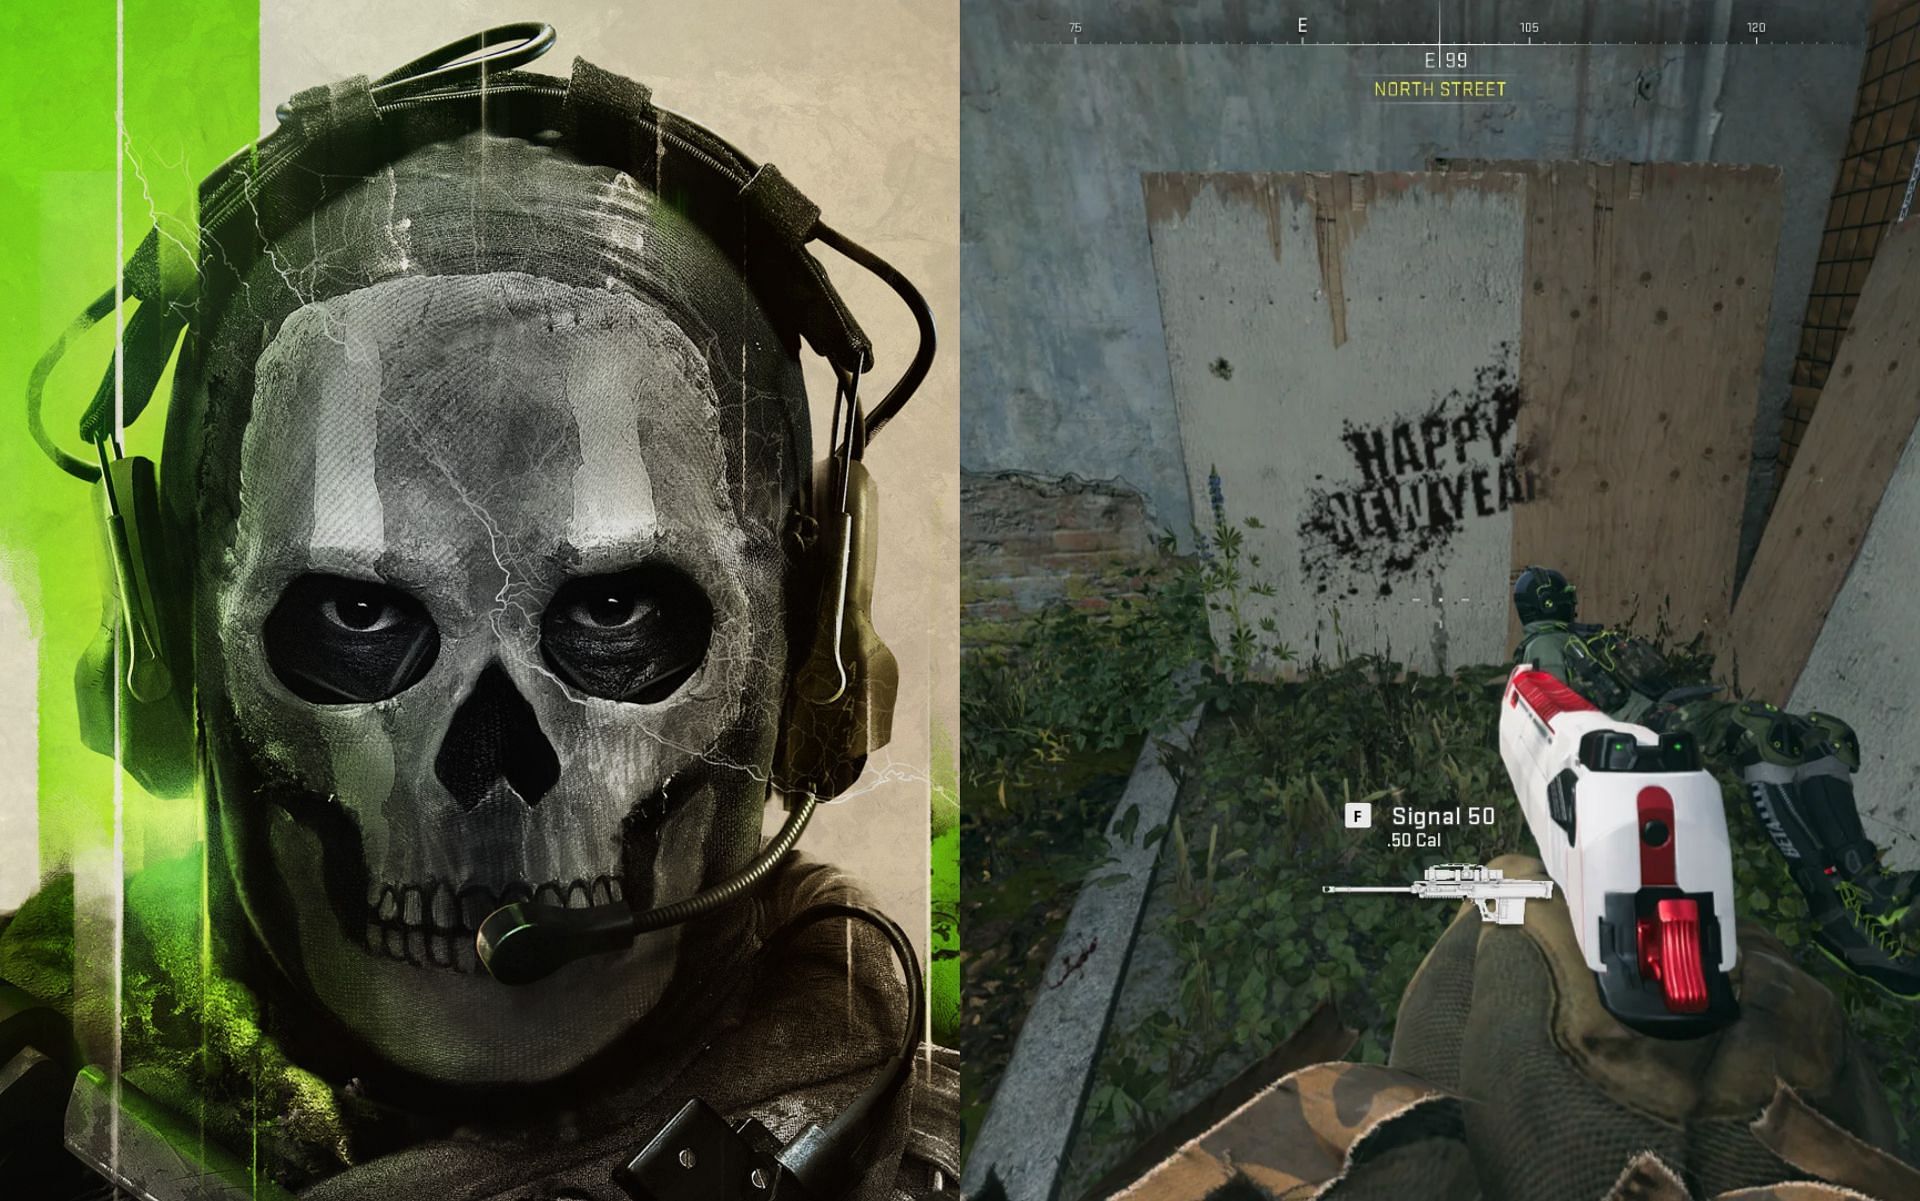 Modern Warfare 2 hidden new year Easter Egg discovered (Image via Activision and u/TNT Jonathan on Reddit)